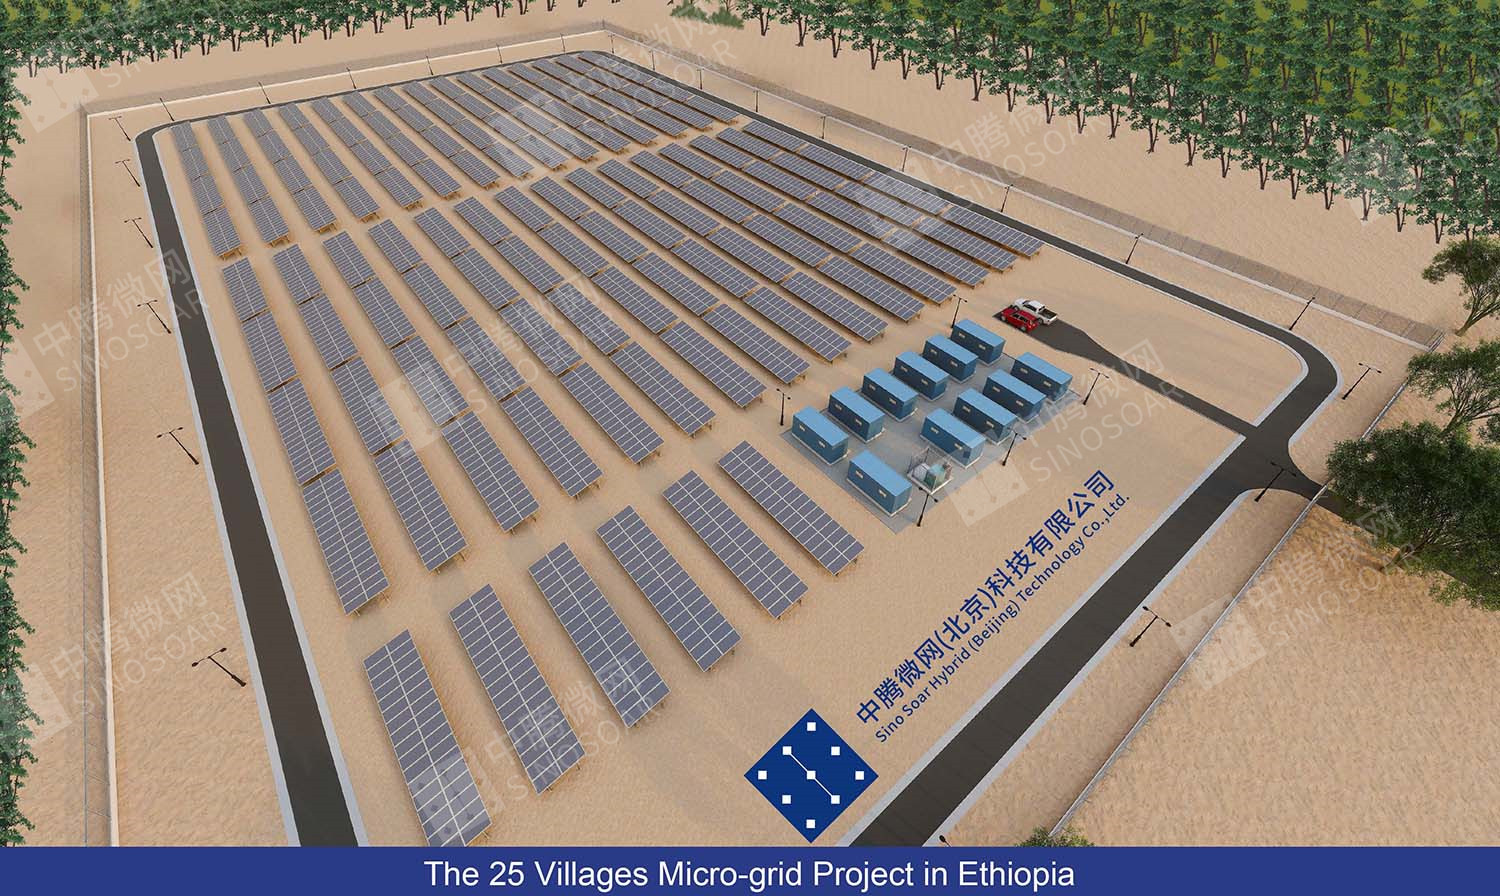 sino-soar-won-the-bid-of-the-25-villages-micro-grid-project-in-ethiopia